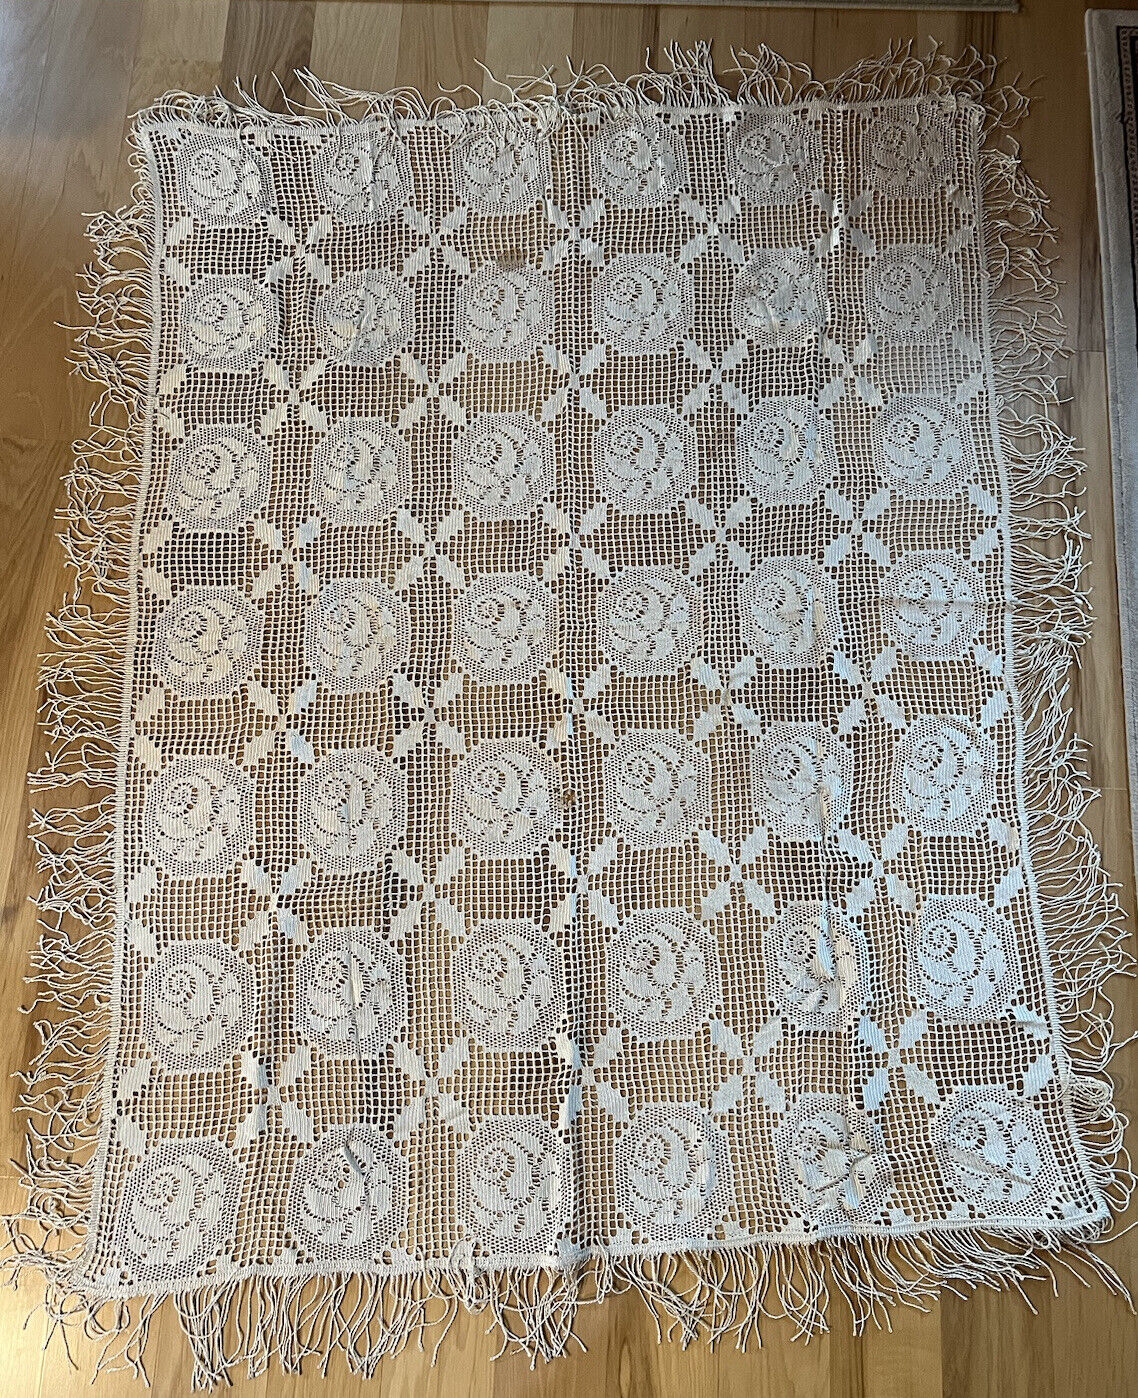 VTG Hand Crocheted Ecru Fringed Tablecloth Lace Table Cover 60x45 Rectangle